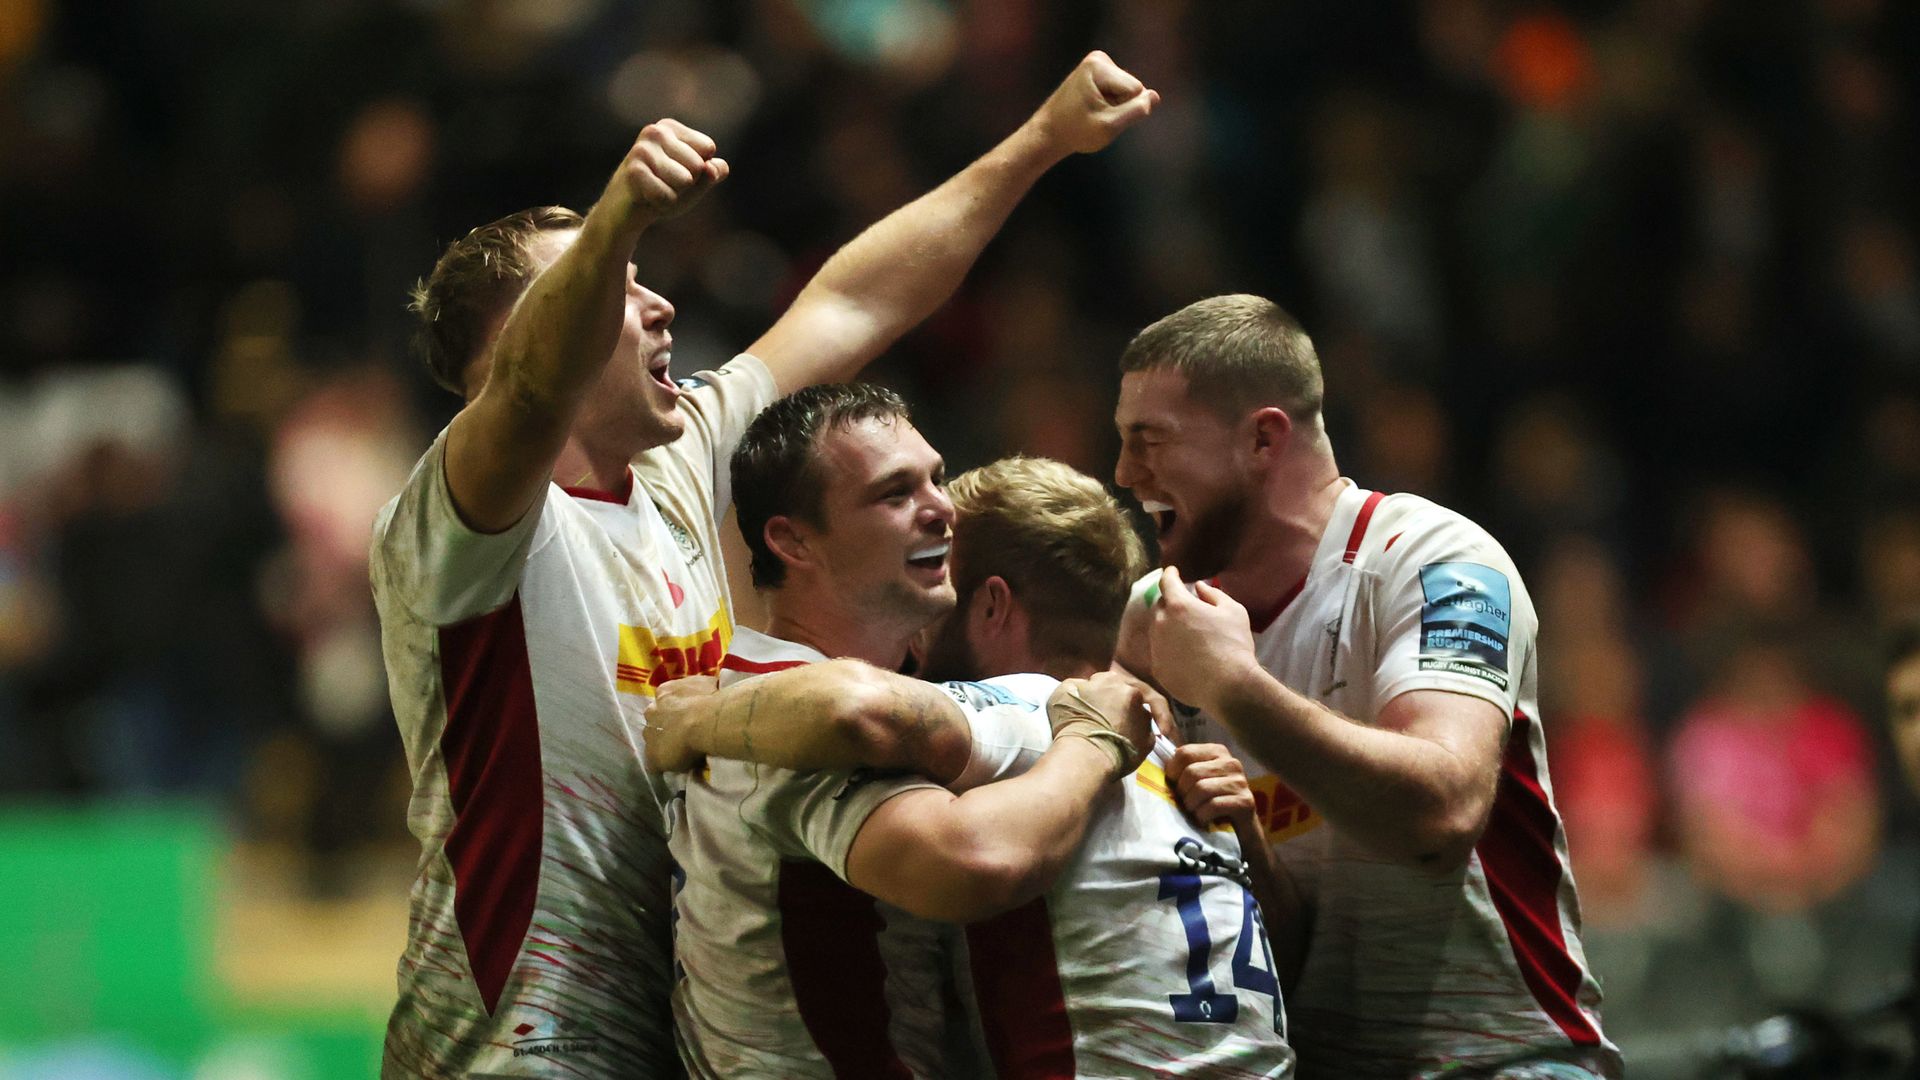 Premiership: Quins go top after win at Leicester | Sale triumph again